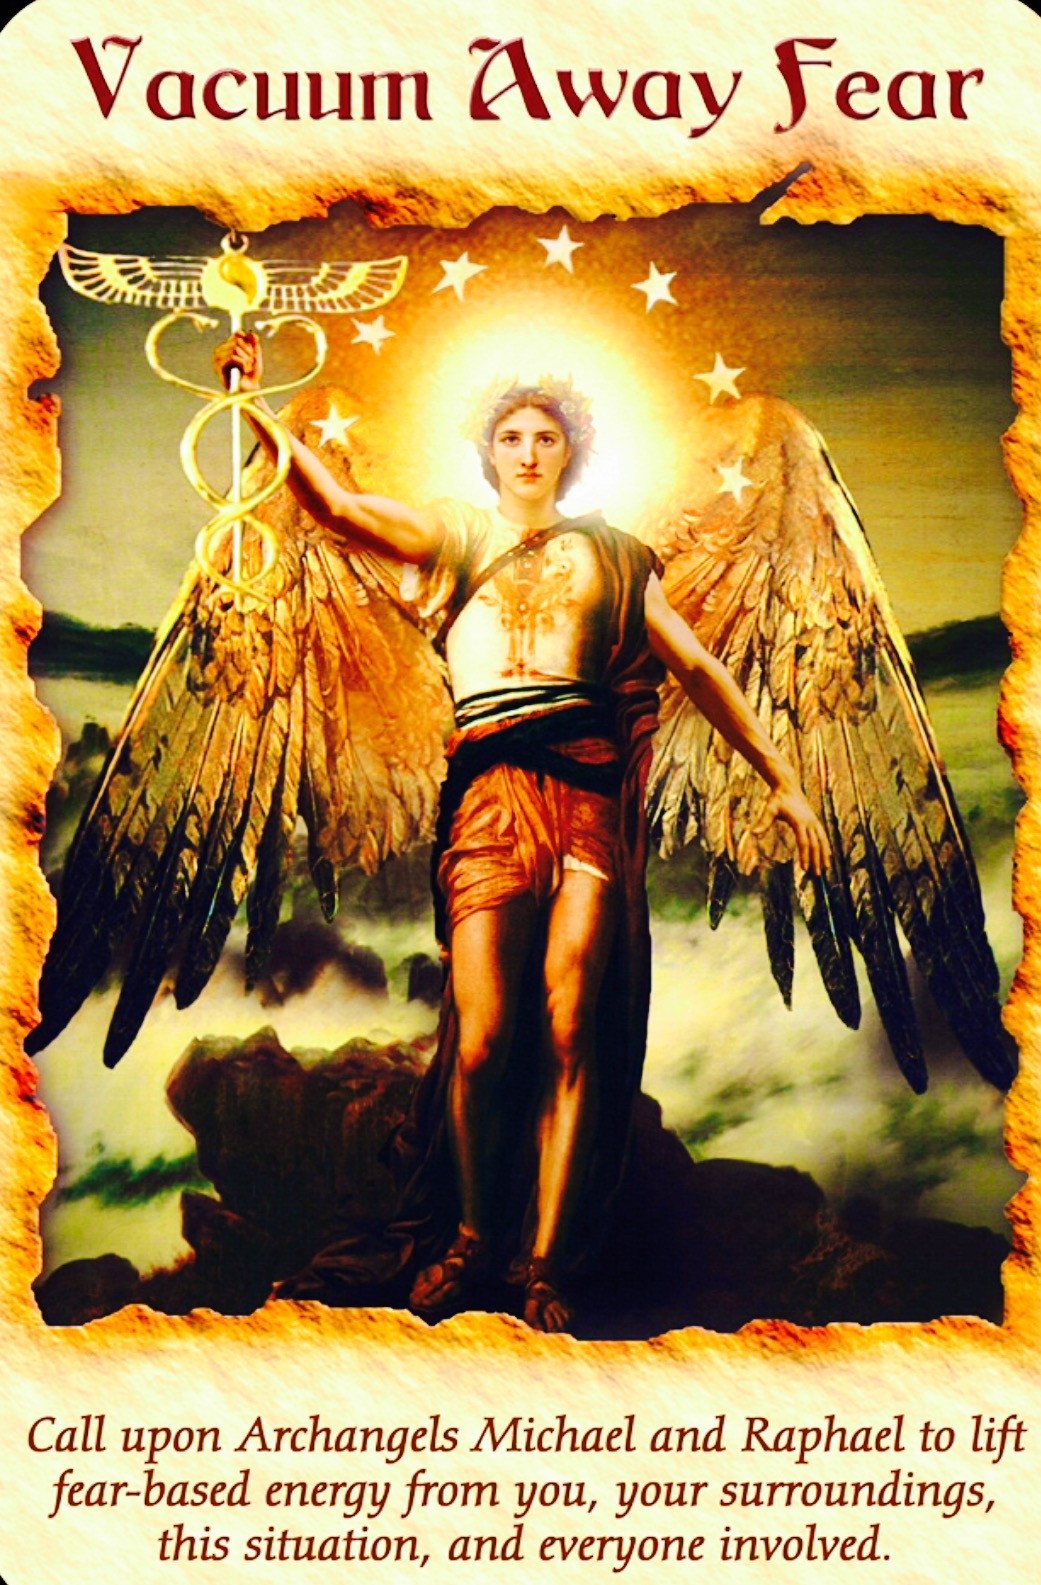 Vacuum Away Fear: “Call upon Archangels Michael and Raphael to lift fear-based energy from you, your surroundings, this situation, and everyone involved.”